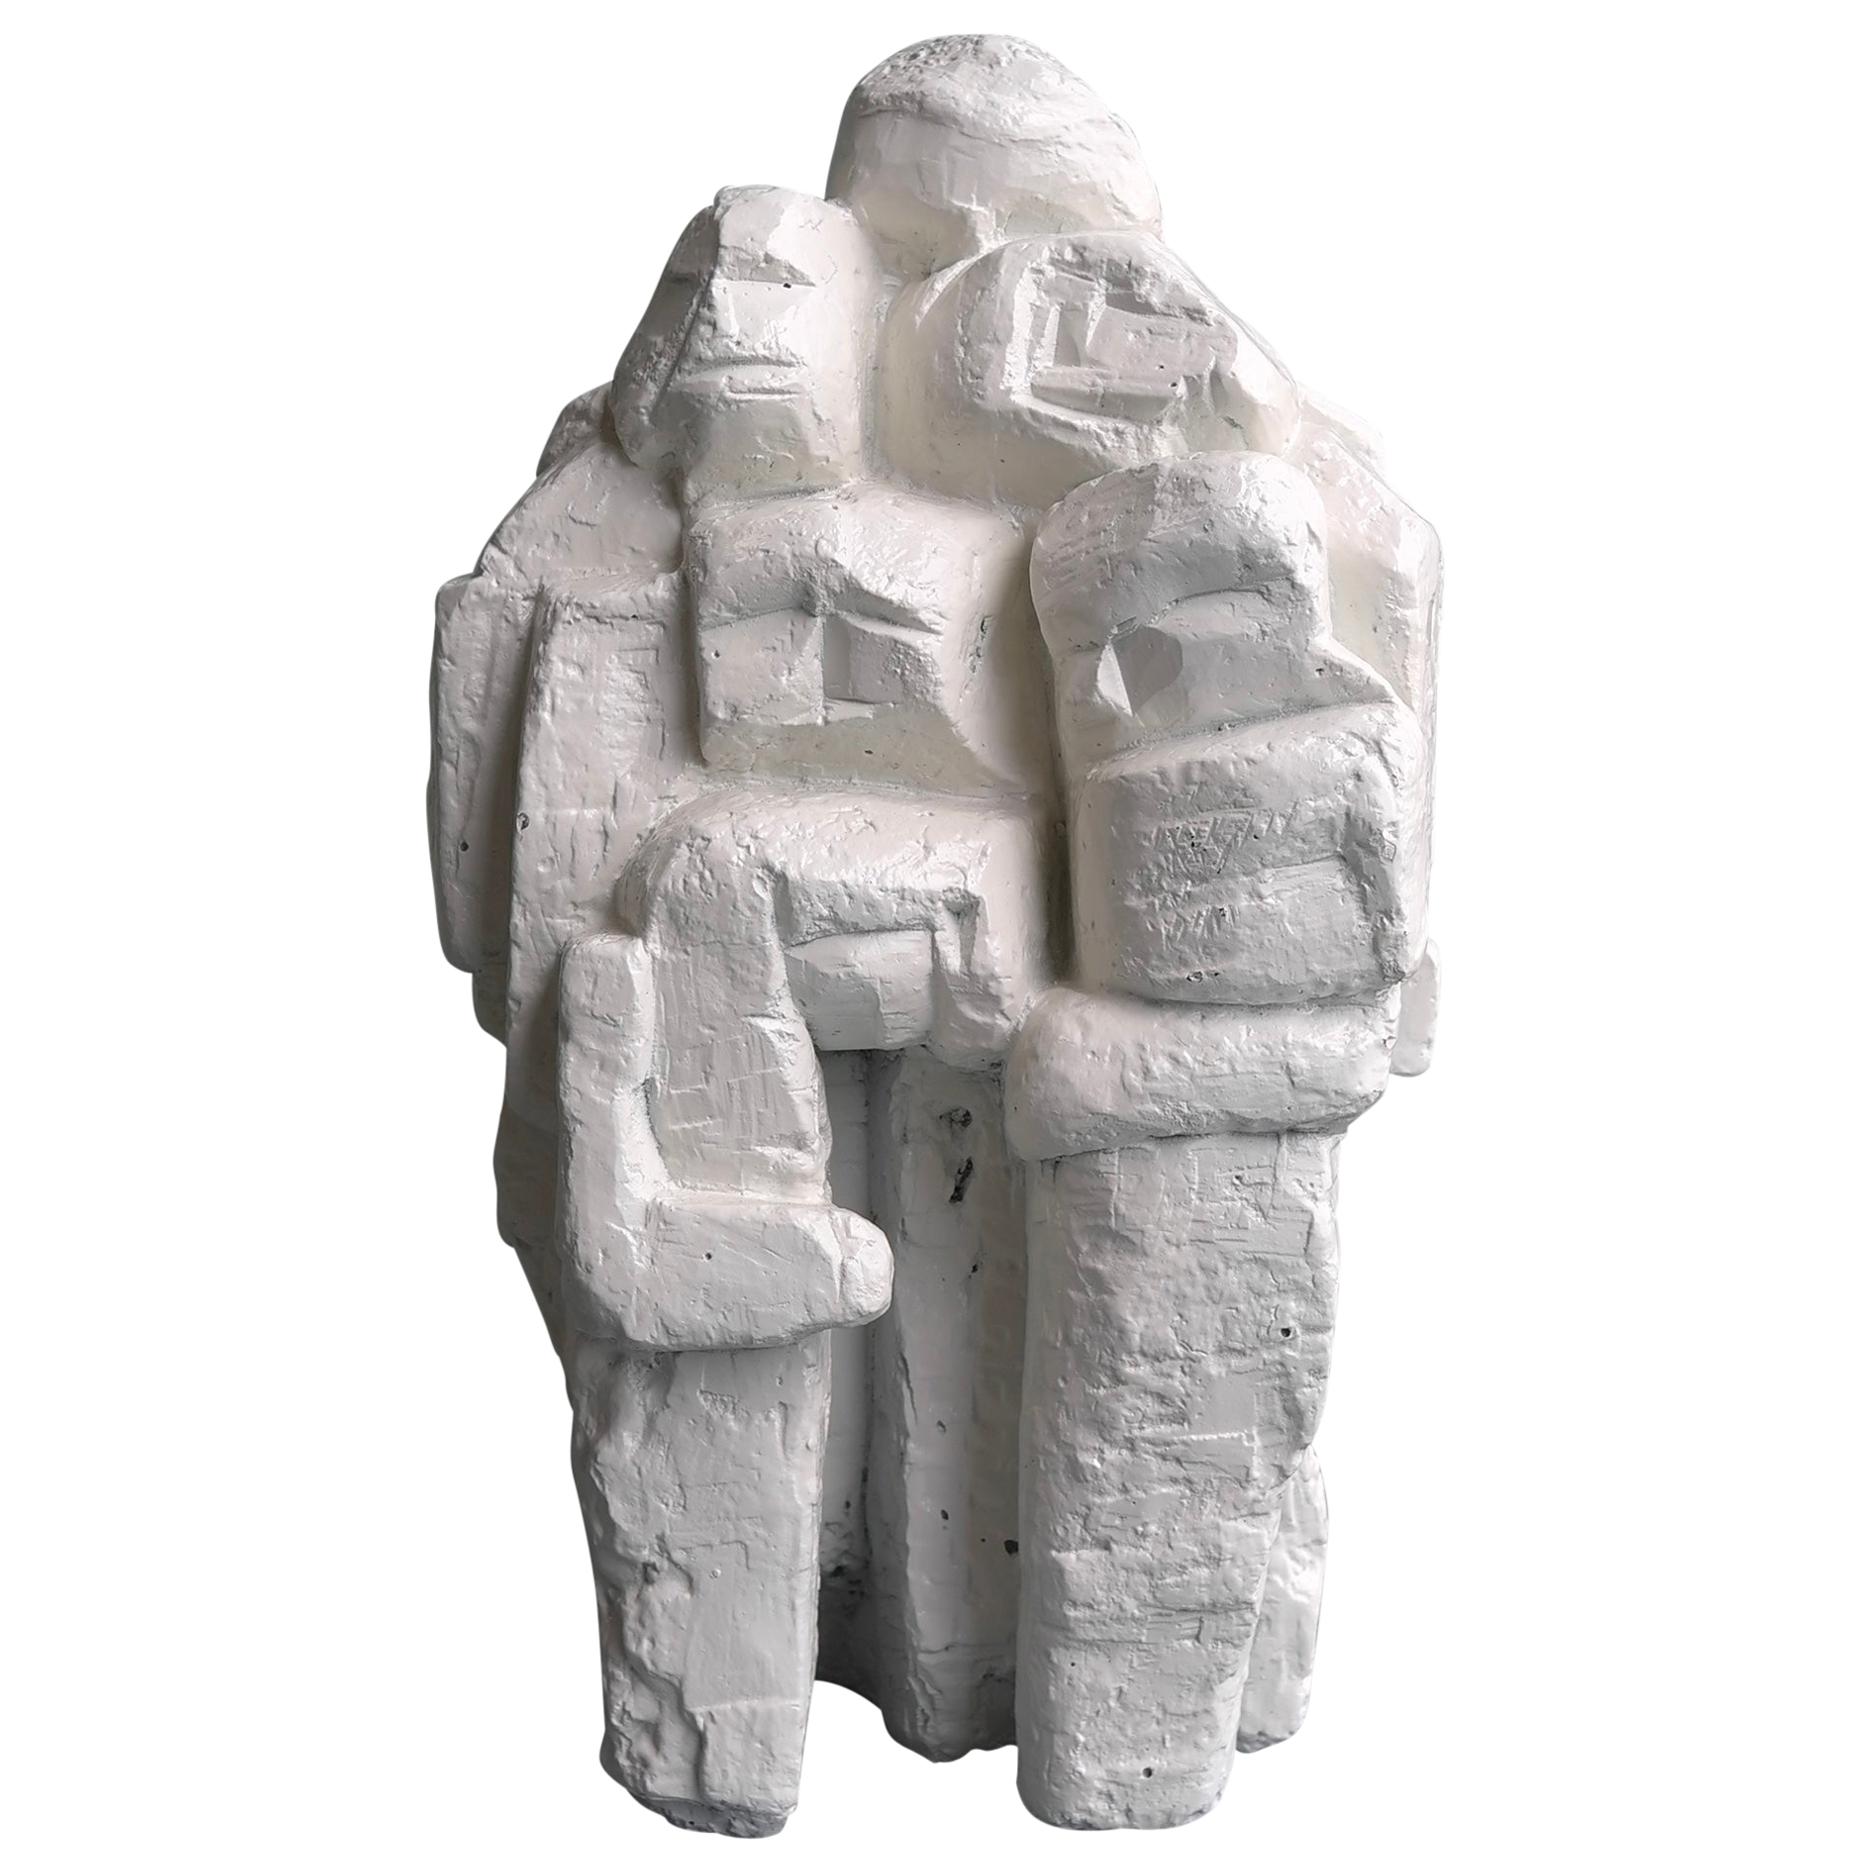 Cubist Decorative White Plaster Sculpture, Group Hug Family, Abstract Art, 1950s For Sale